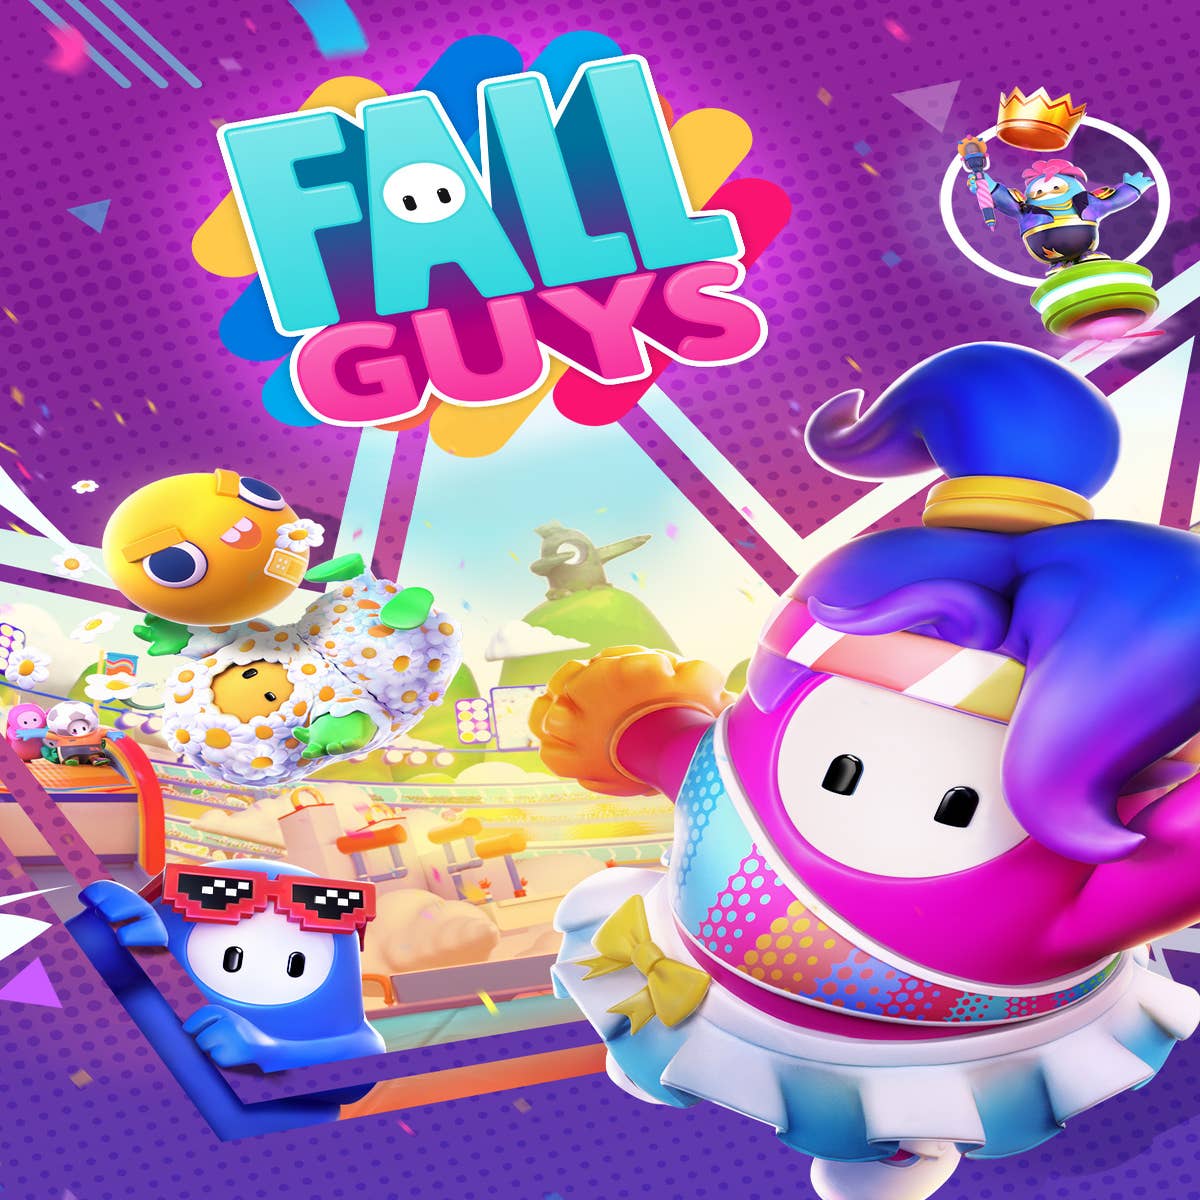 Fall Guys' lands on Switch, Xbox and Epic Games Store on June 21st